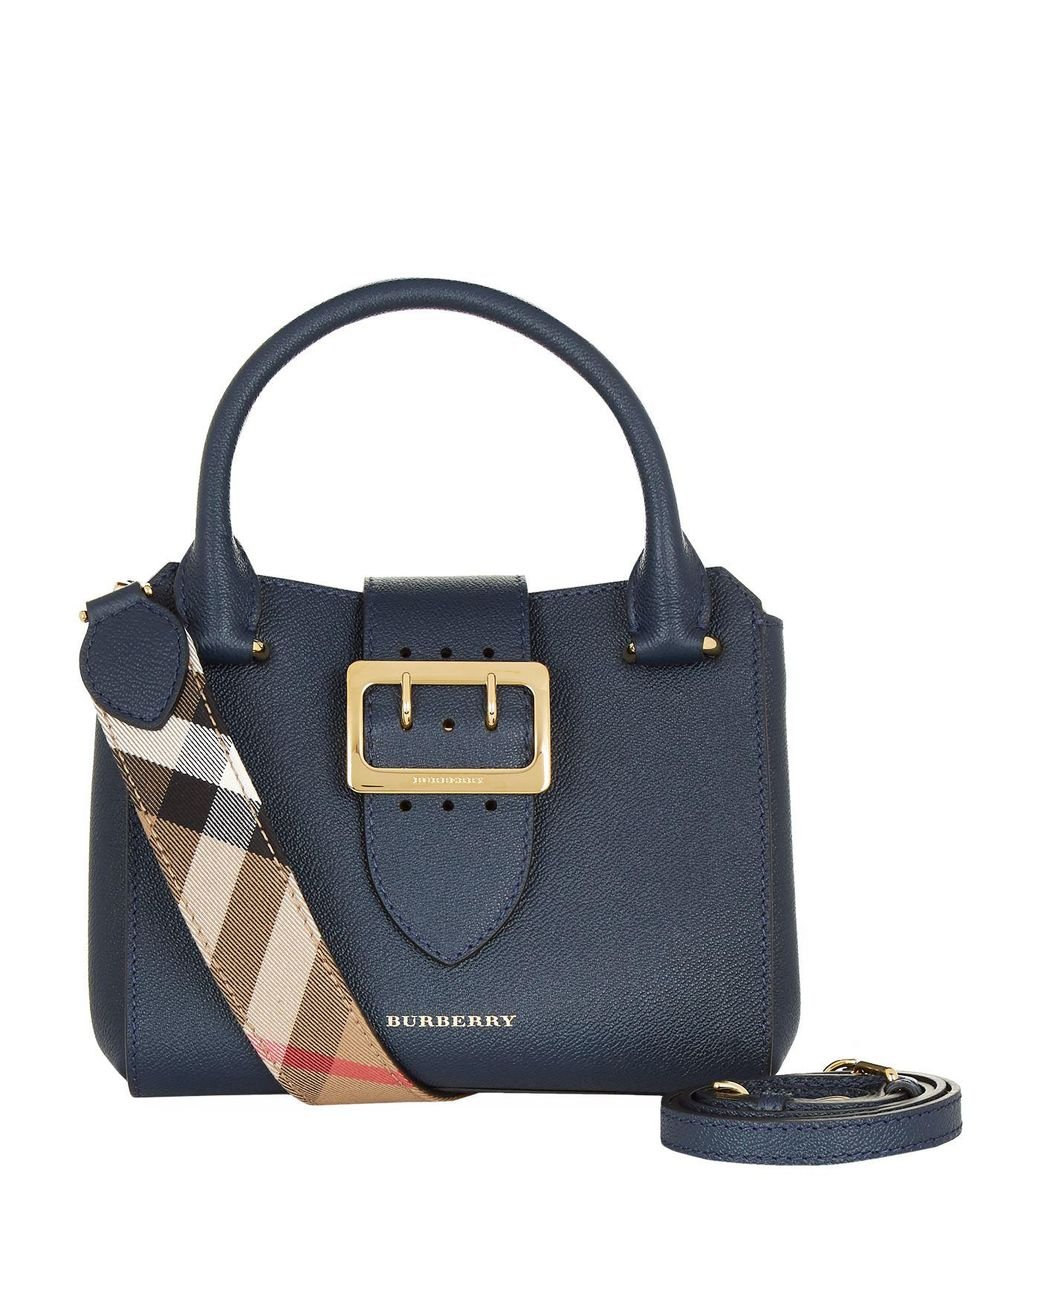 Burberry Small Buckle Tote Bag in Blue | Lyst